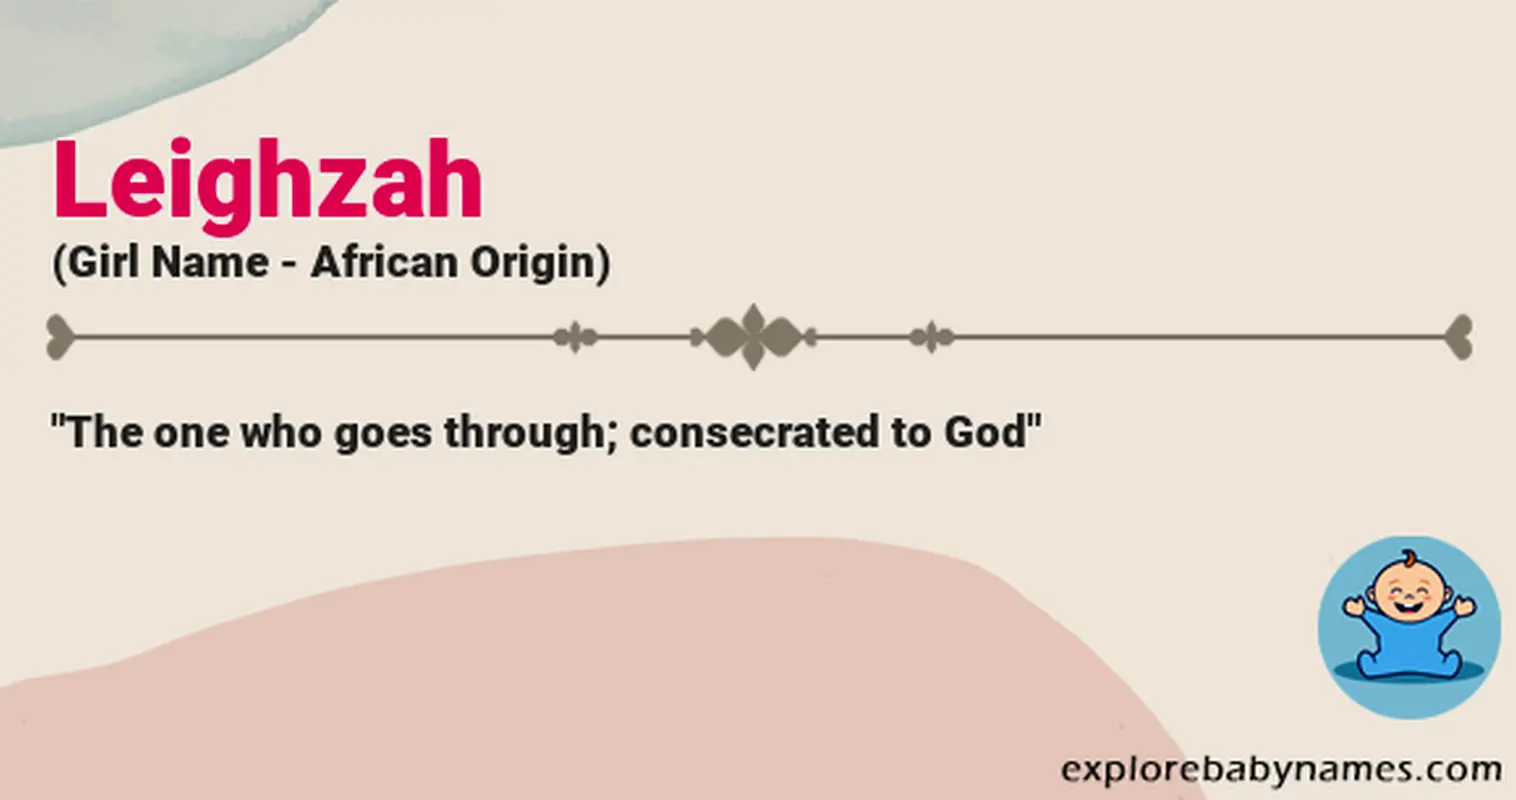 Meaning of Leighzah